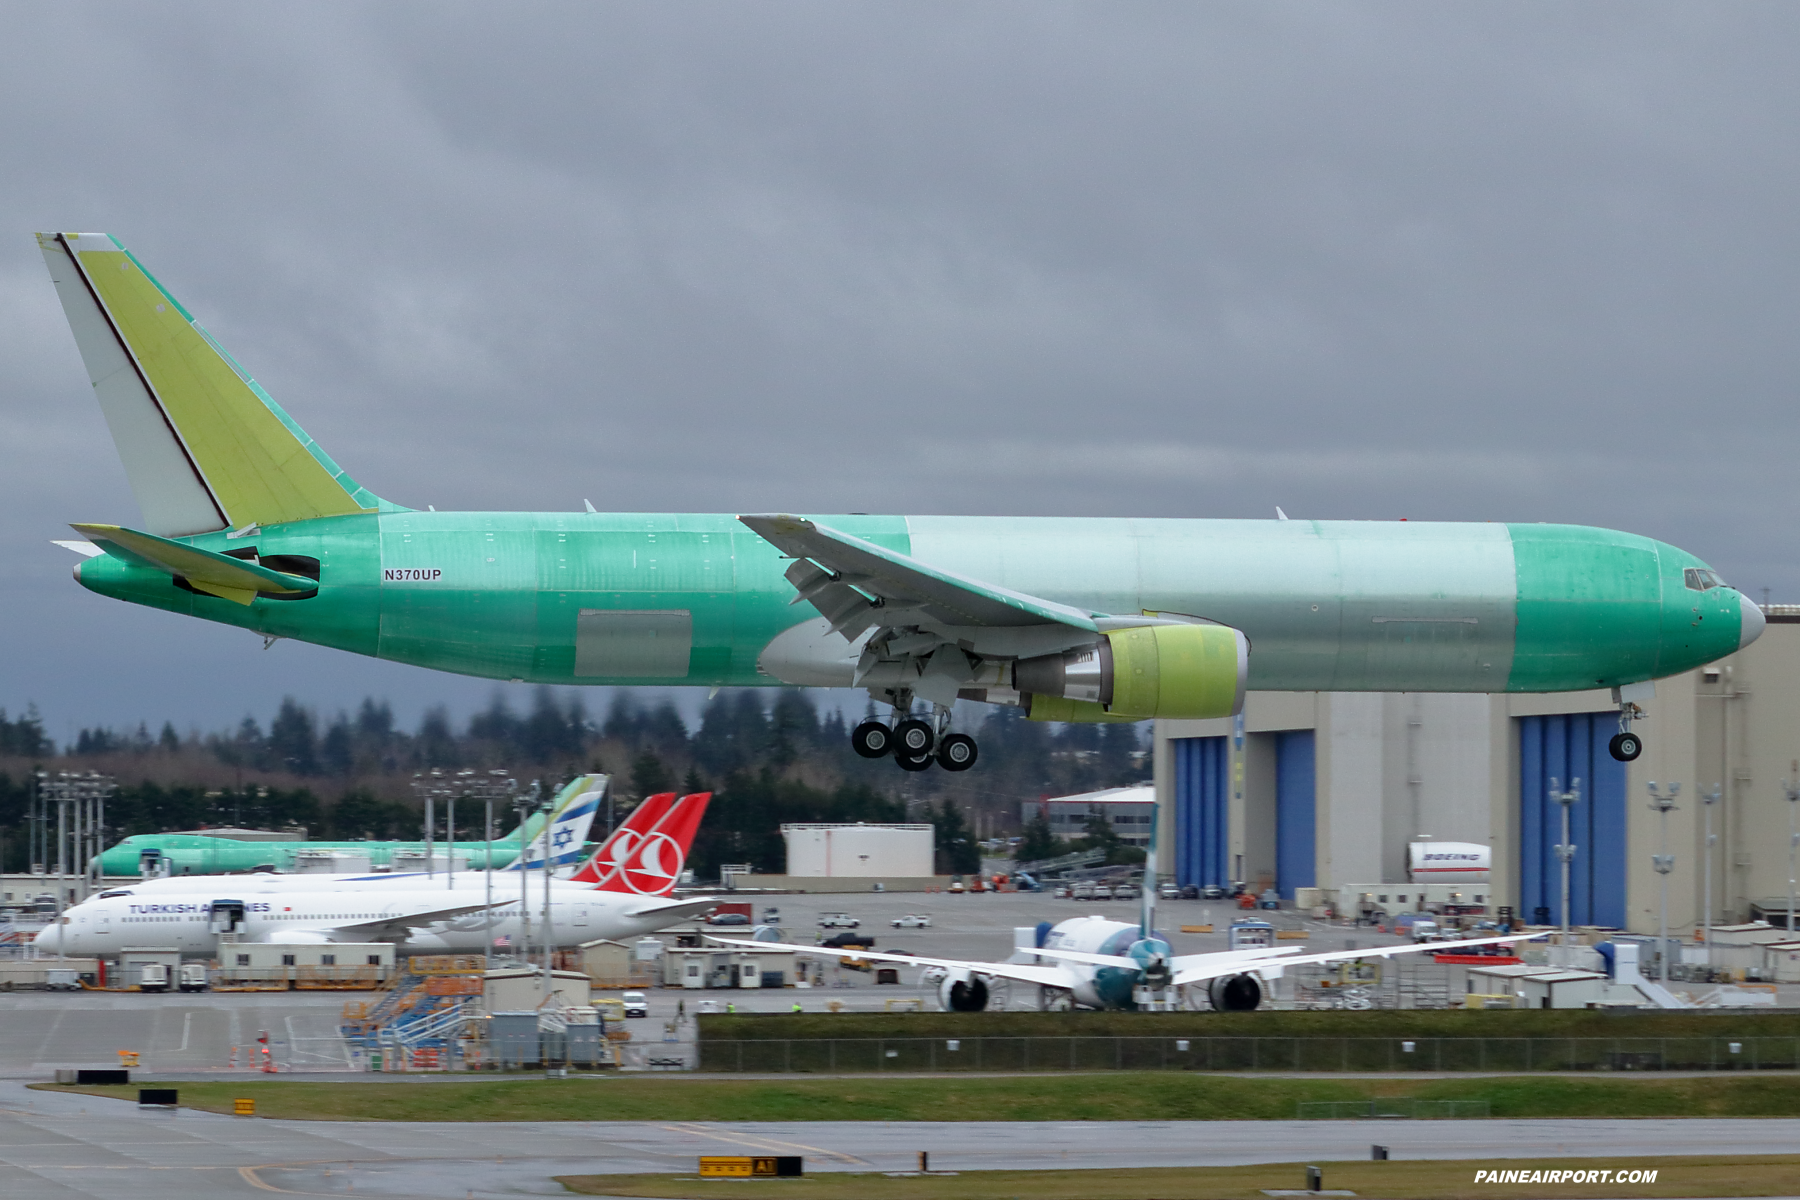 UPS 767 N370UP at Paine Field